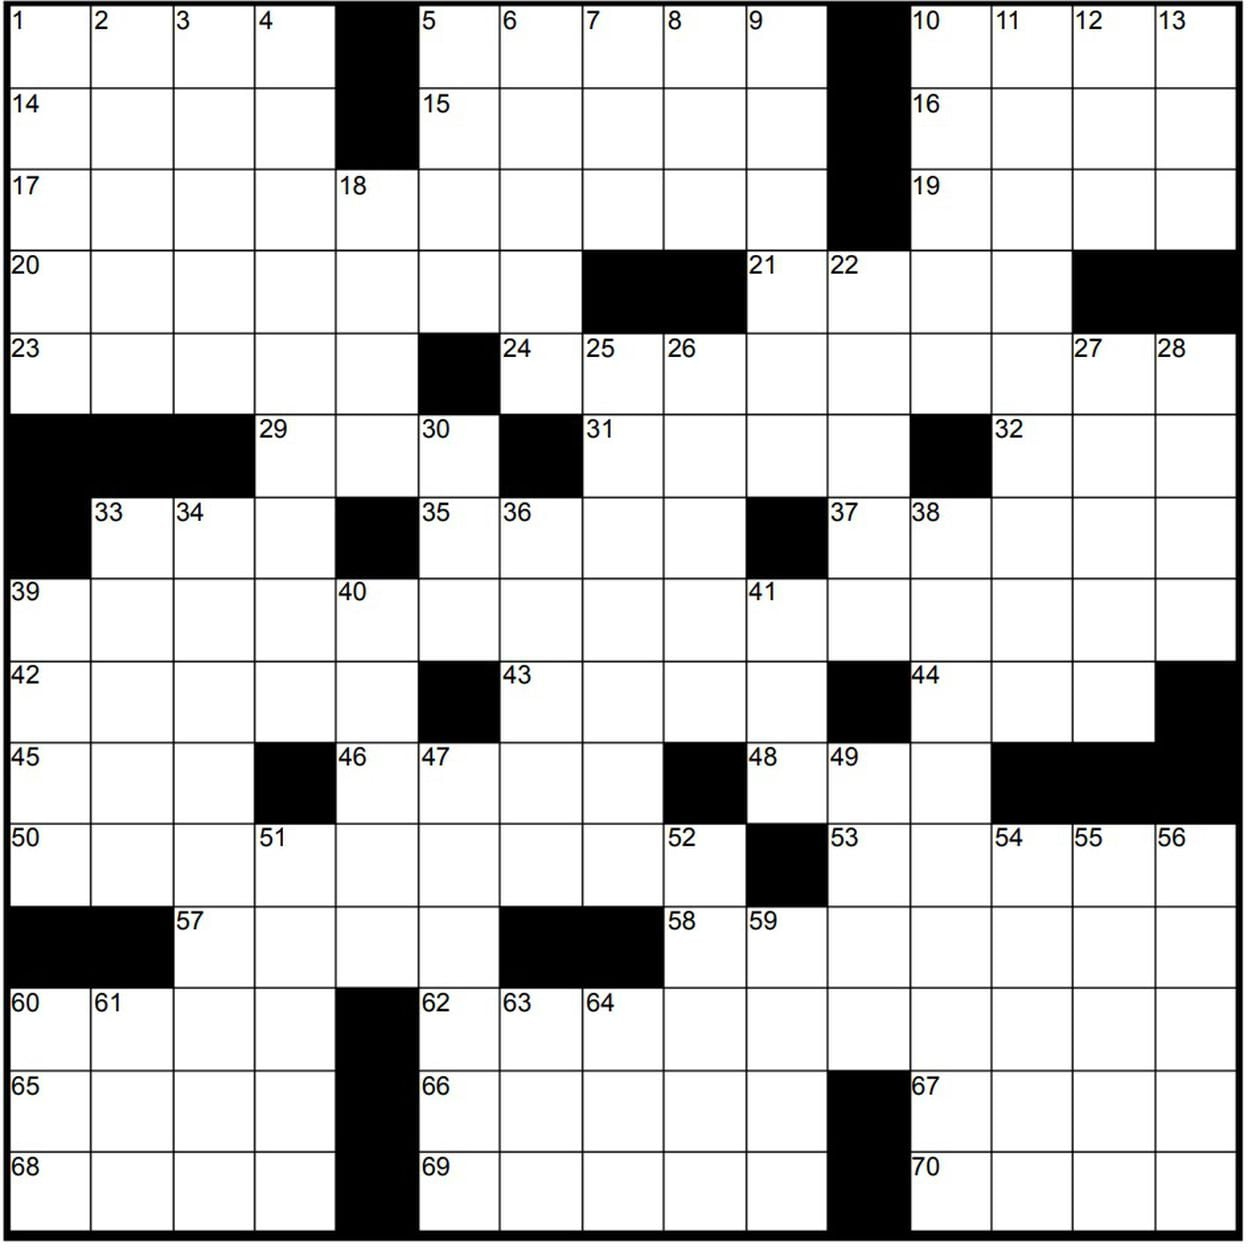 Play Free Crossword Puzzles From The Washington Post The Washington Post